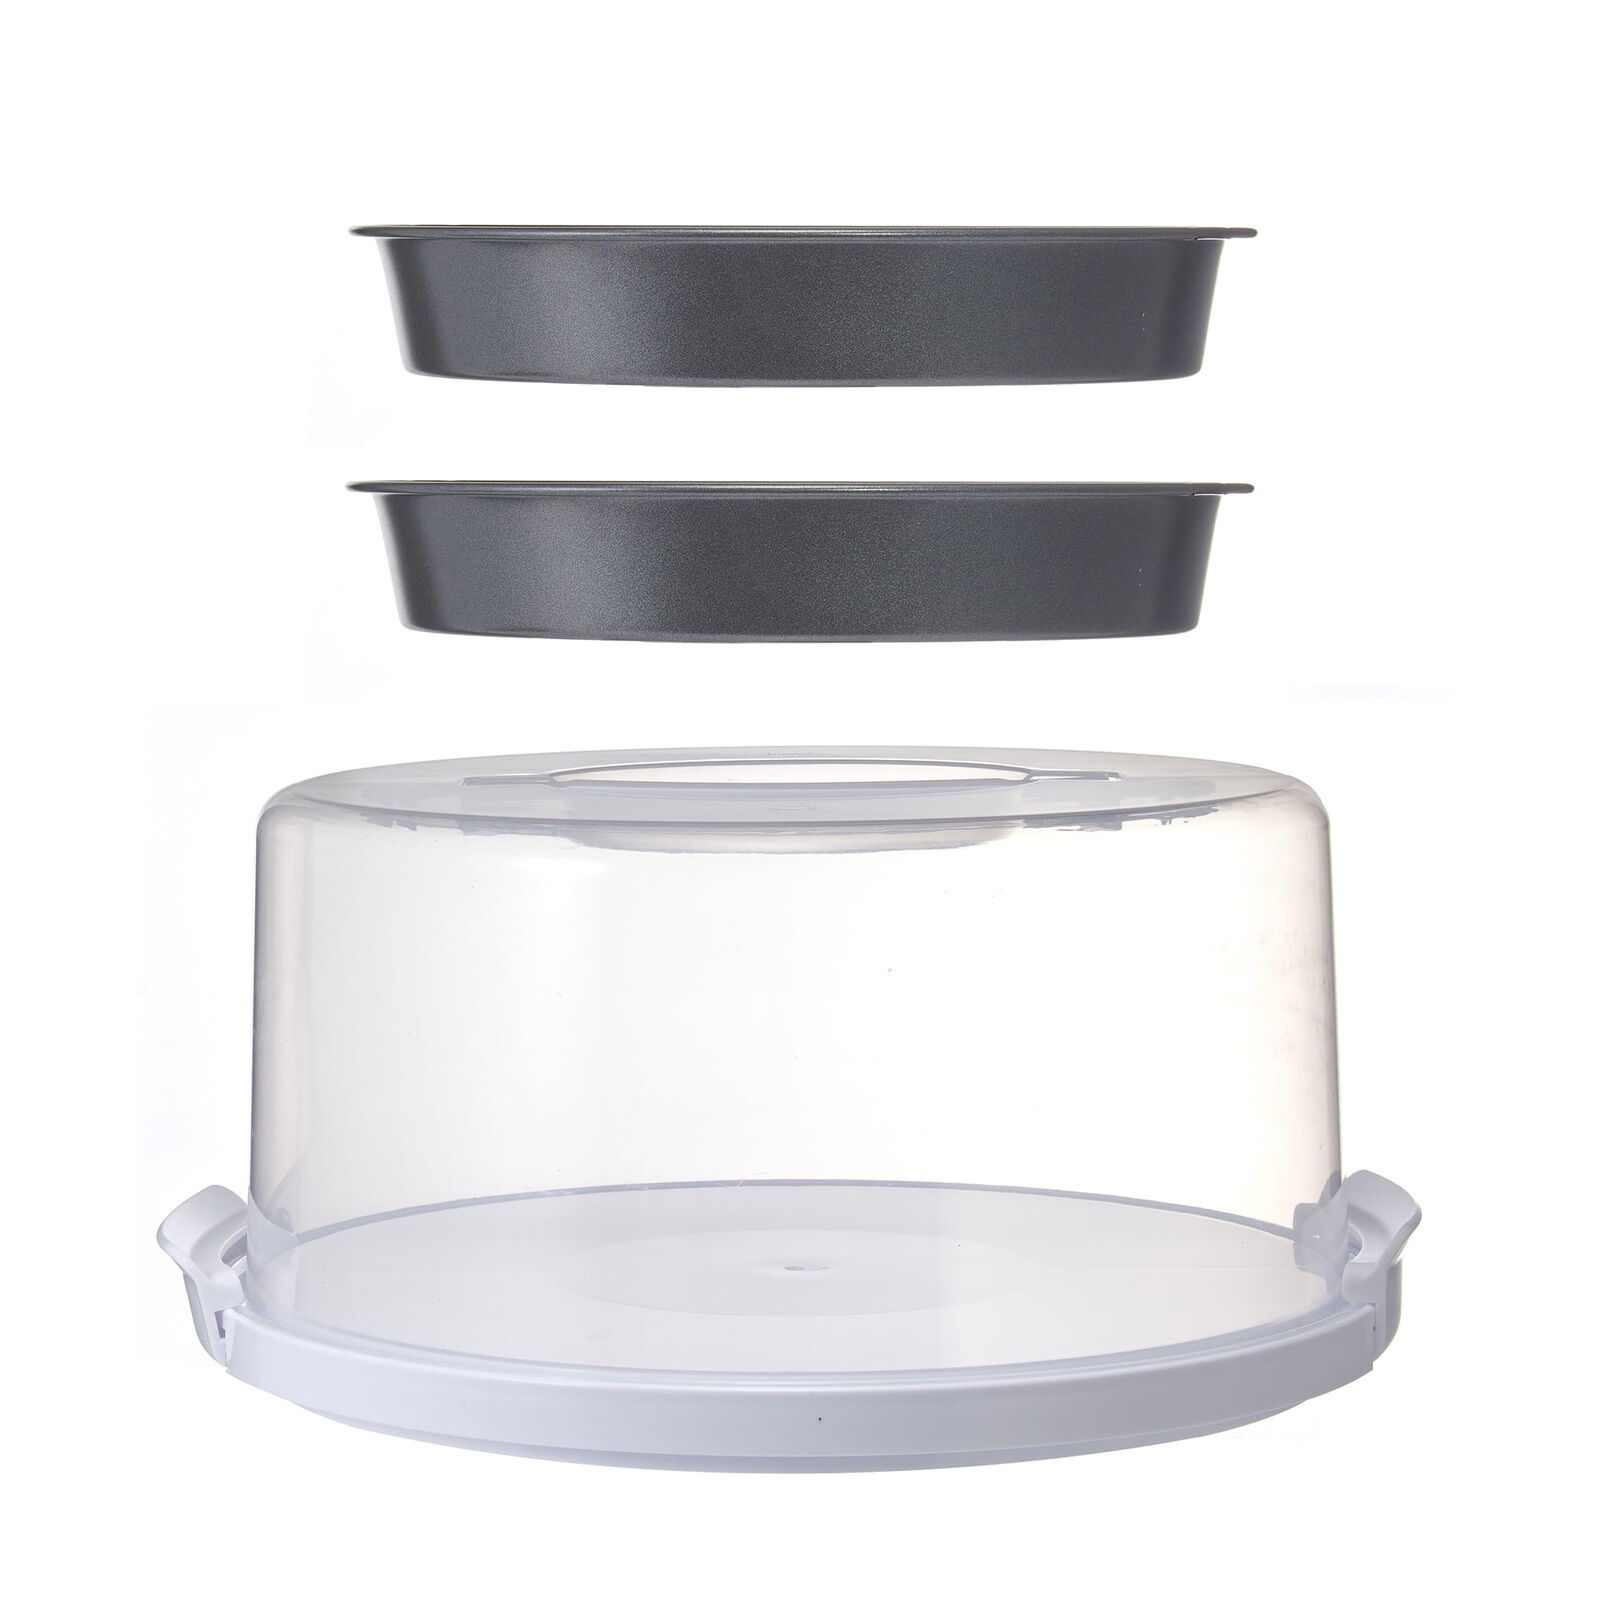 Mainstays 12-Inch Clear Cake Stand Comes with 2 9-Inch Gray Discs Carbon Steel